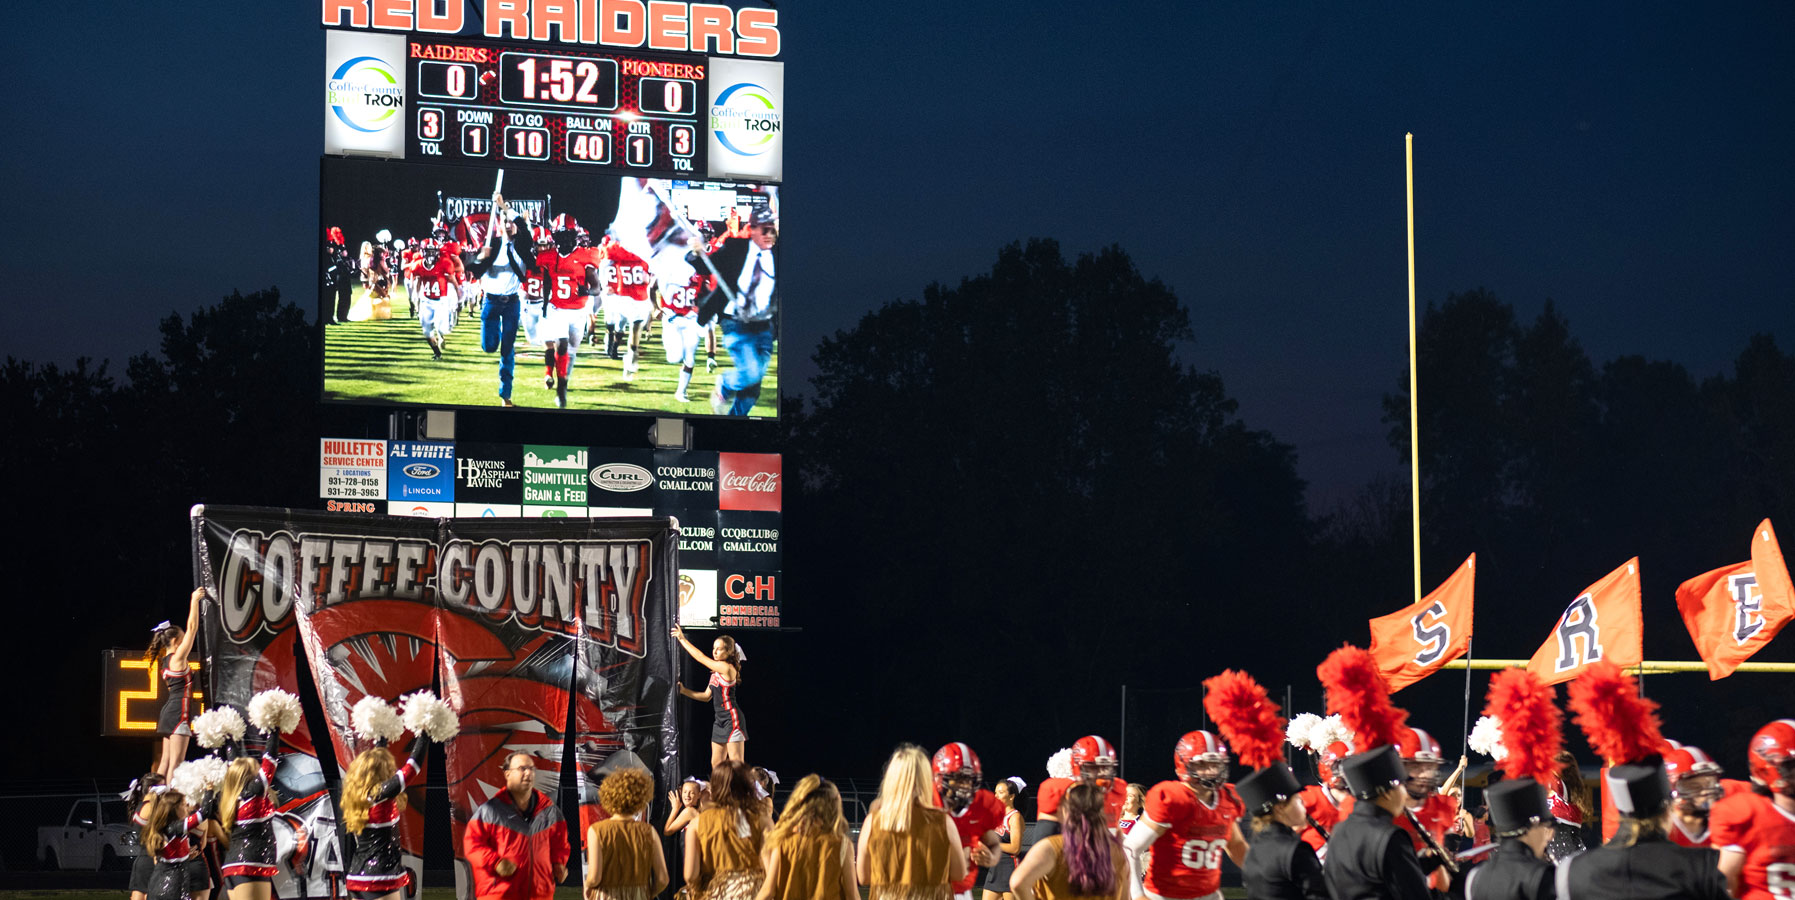 High school steps up its game with video scoreboard